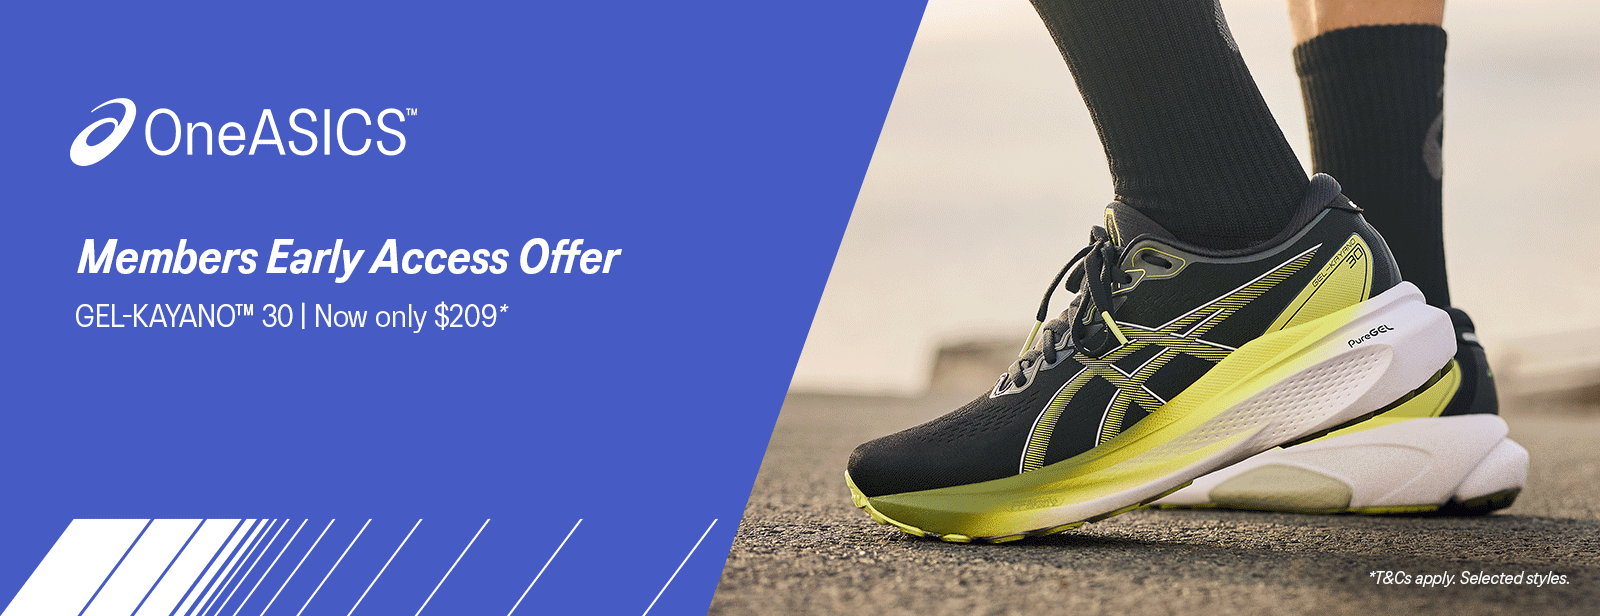 Shop GEL-KAYANO 30™ Sale. Exclusive Early Access to OneASICS Members only​.